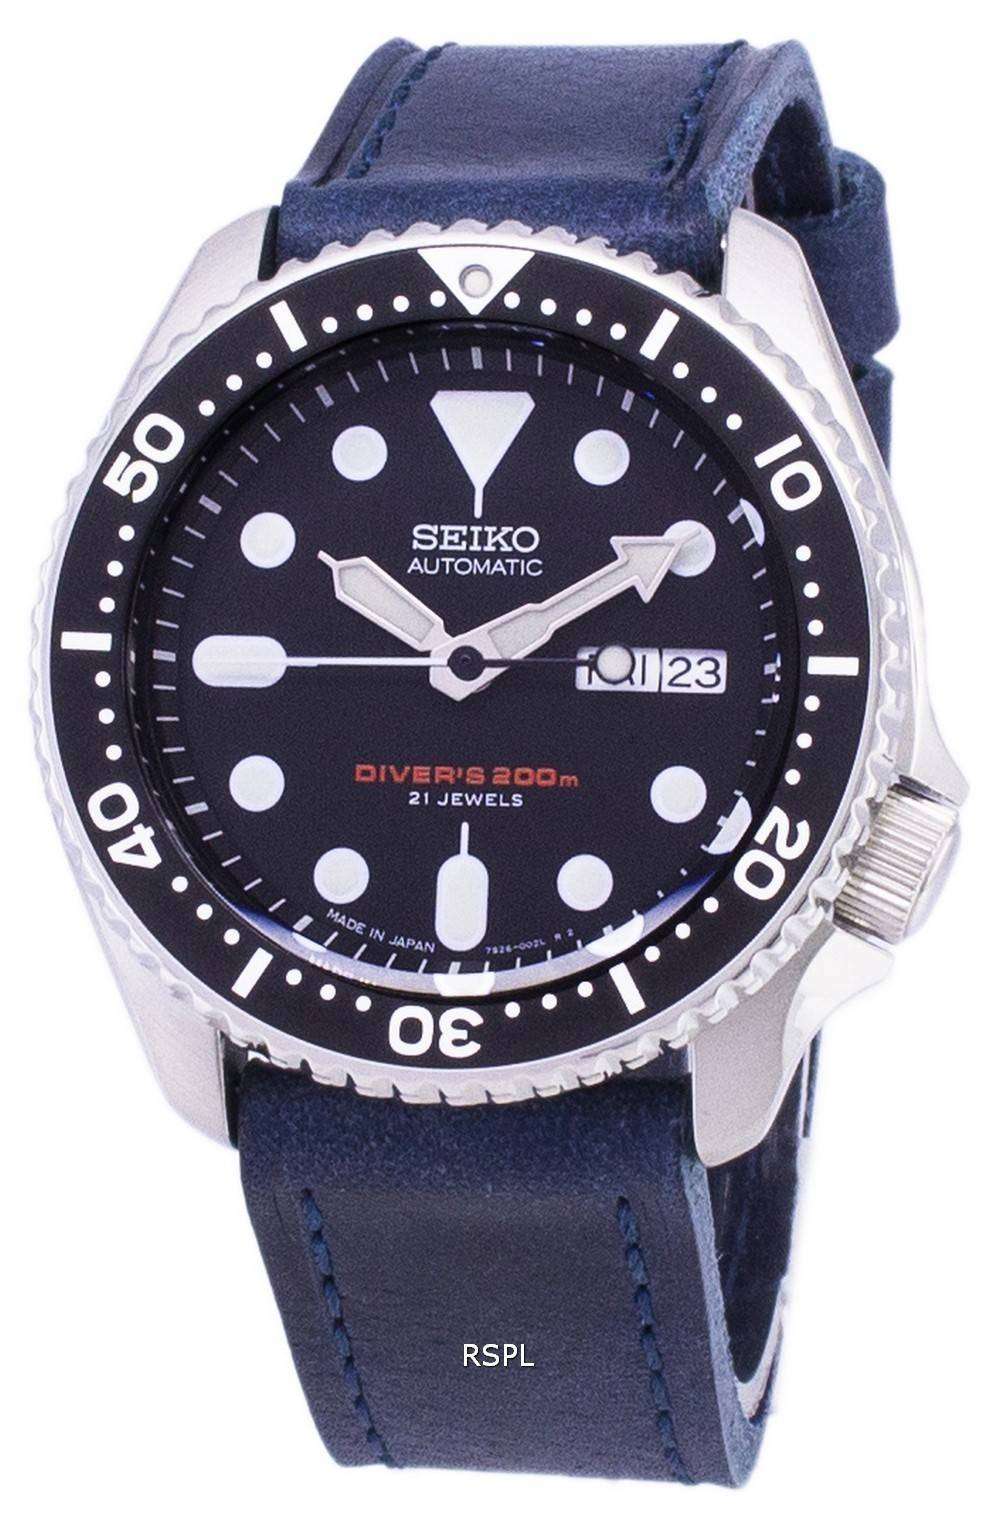 Seiko Automatic SKX007J1-LS13 Diver's 200M Japan Made Blue Leather ...